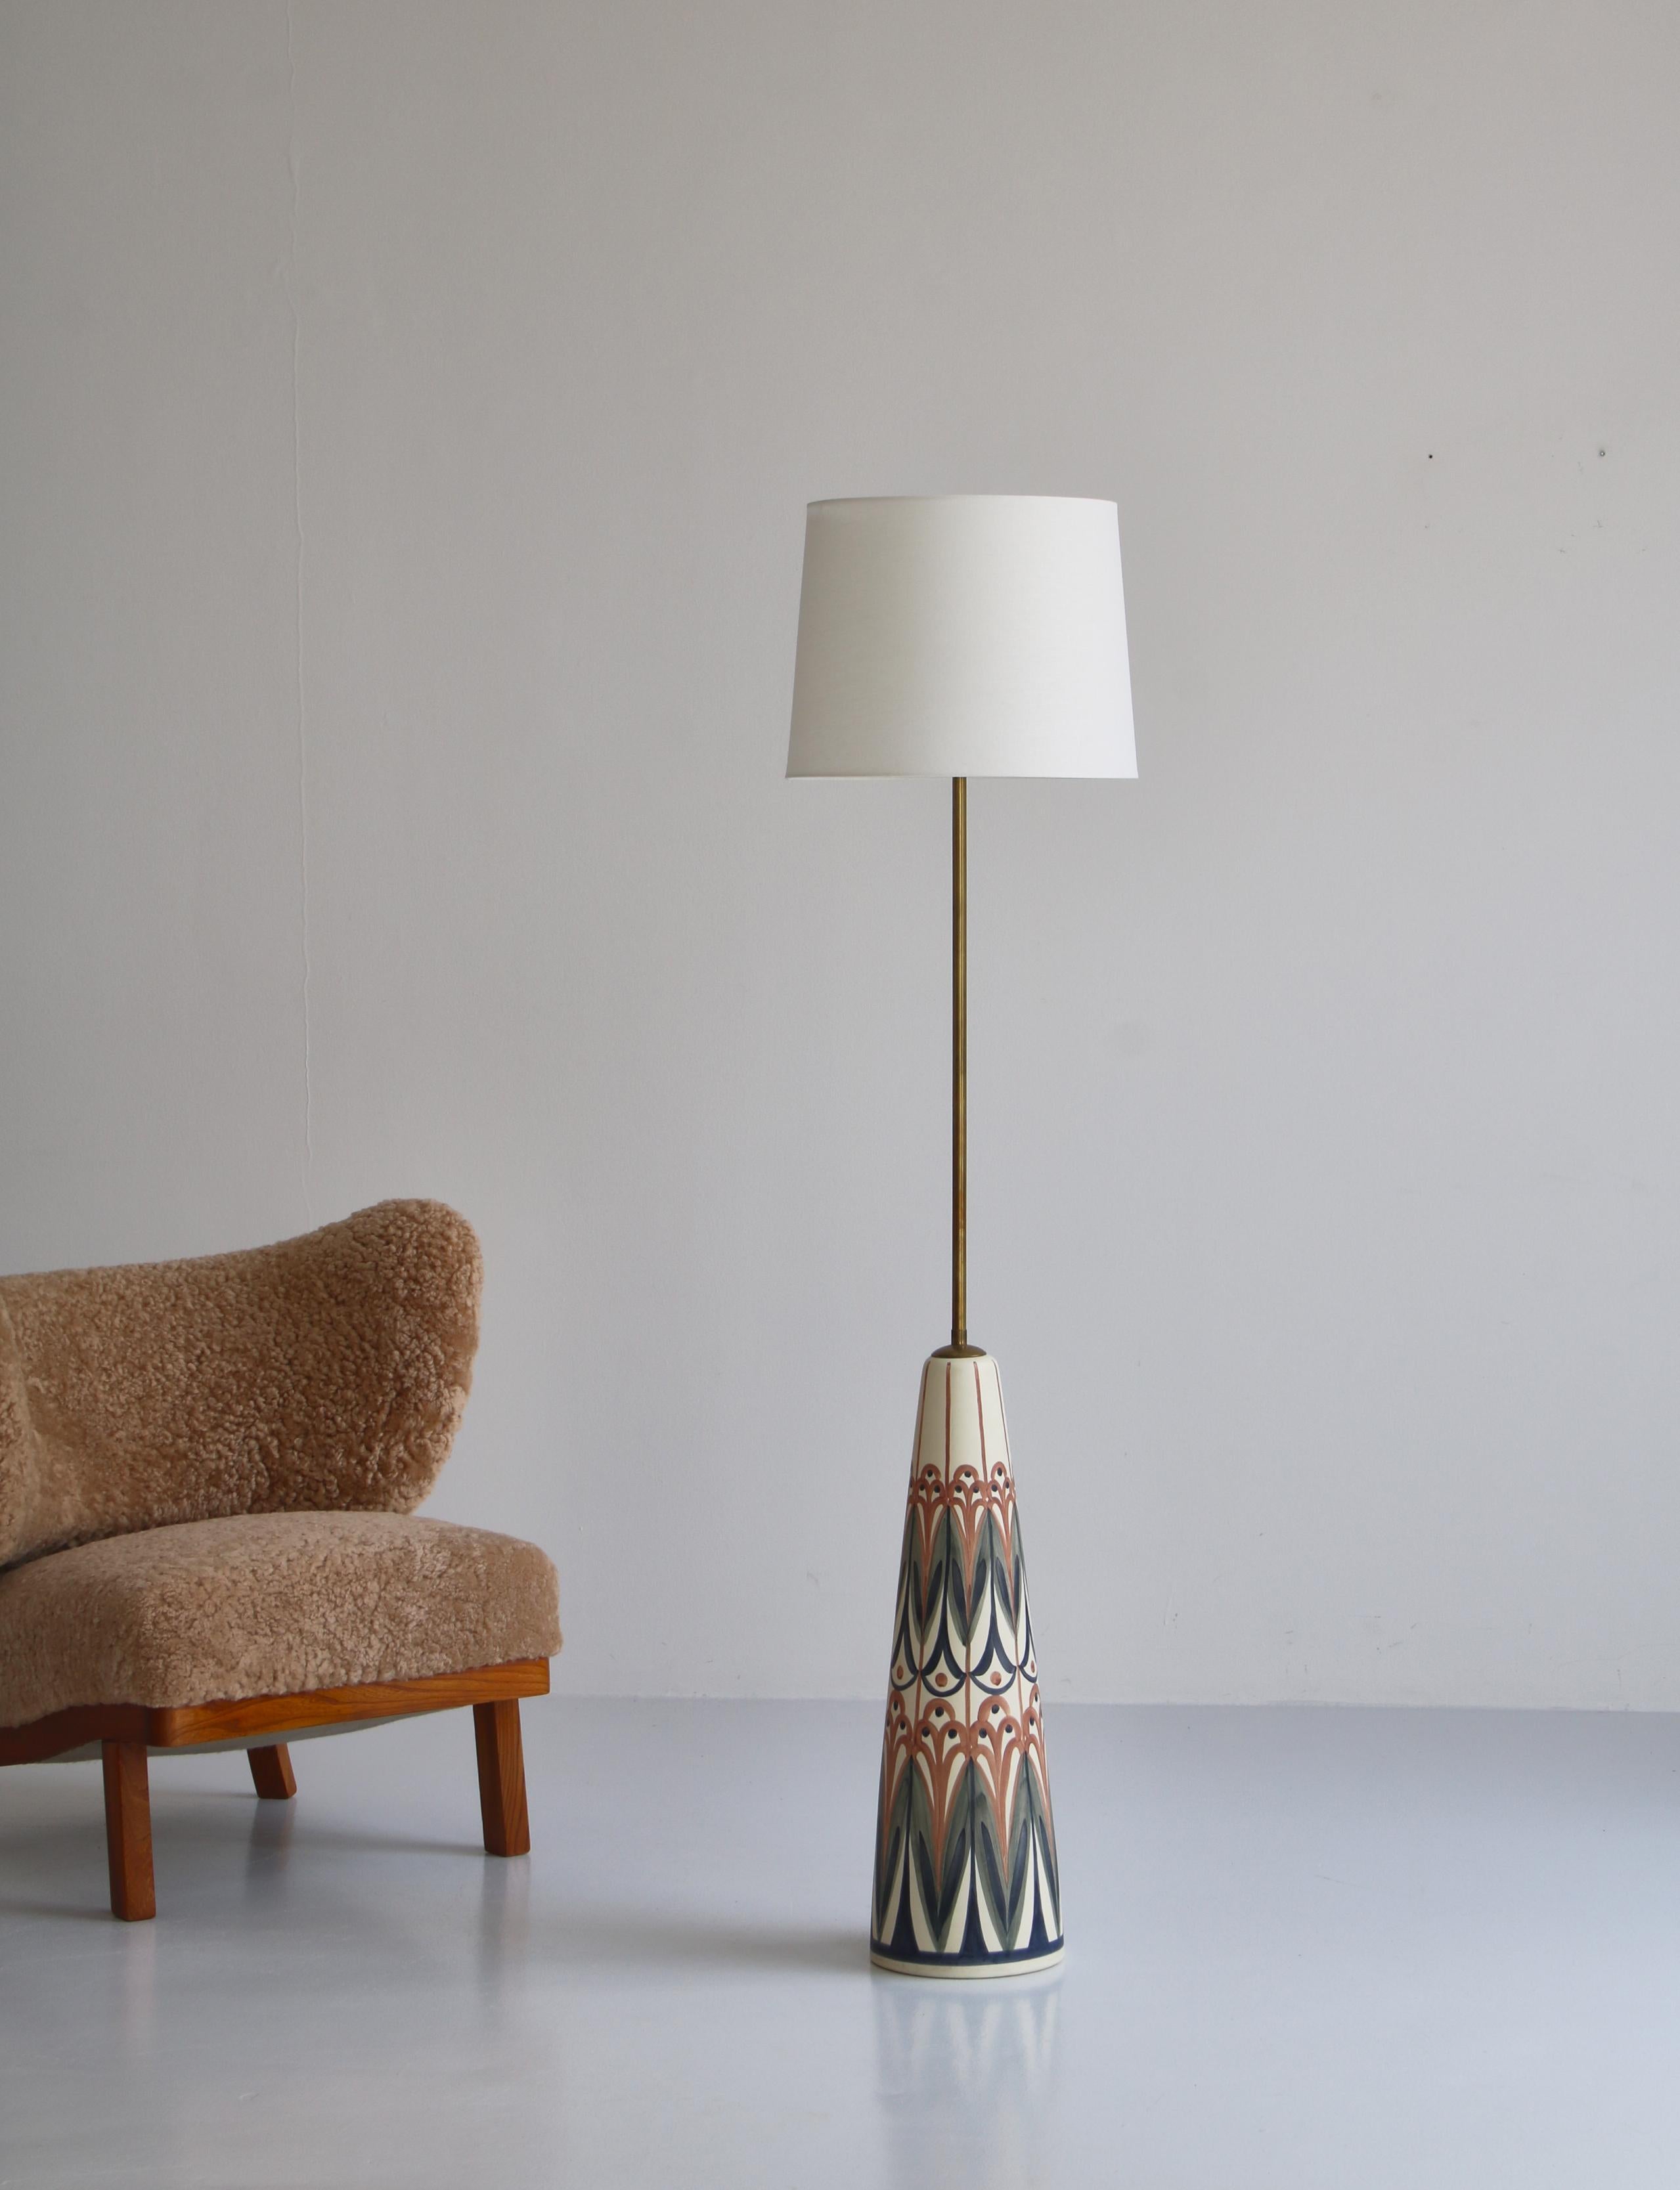 Stunning hand painted floor lamp from the 1960s by Danish artist Rigmor Nielsen at Søholm ceramics workshop, Bornholm. Each of these rare lamps were made by hand and are unique in their decorations. The painted base holds a brass stem with an